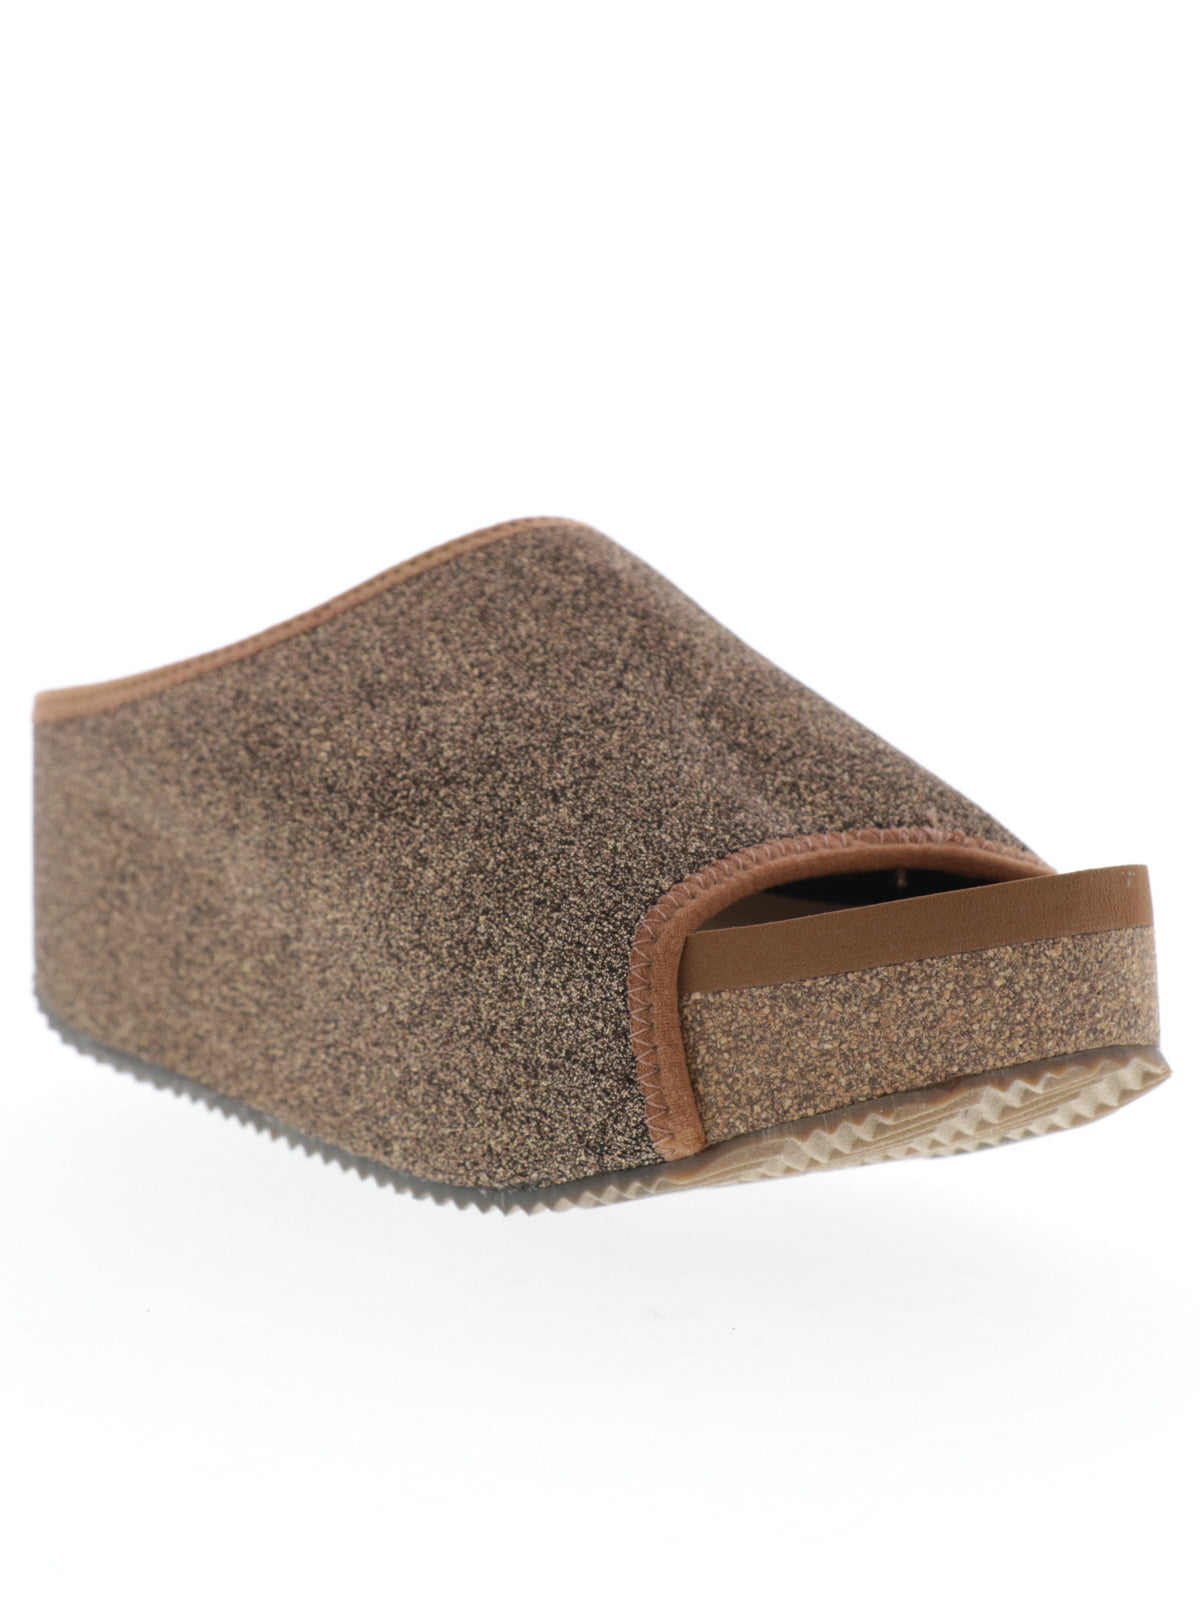 Volatile’s Festina open toe slide in sparkling stretch knit was an instant hit when it first launched and has since become one of our classic styles, offering total comfort in a chic silhouette with a shimmer to keep things joyful. The soft, stretch knit upper gently hugs the foot while our signature ultra comfort EVA insole keeps soles restful, even after a full day of being on your feet. Perfect for all day special events. bronze 2